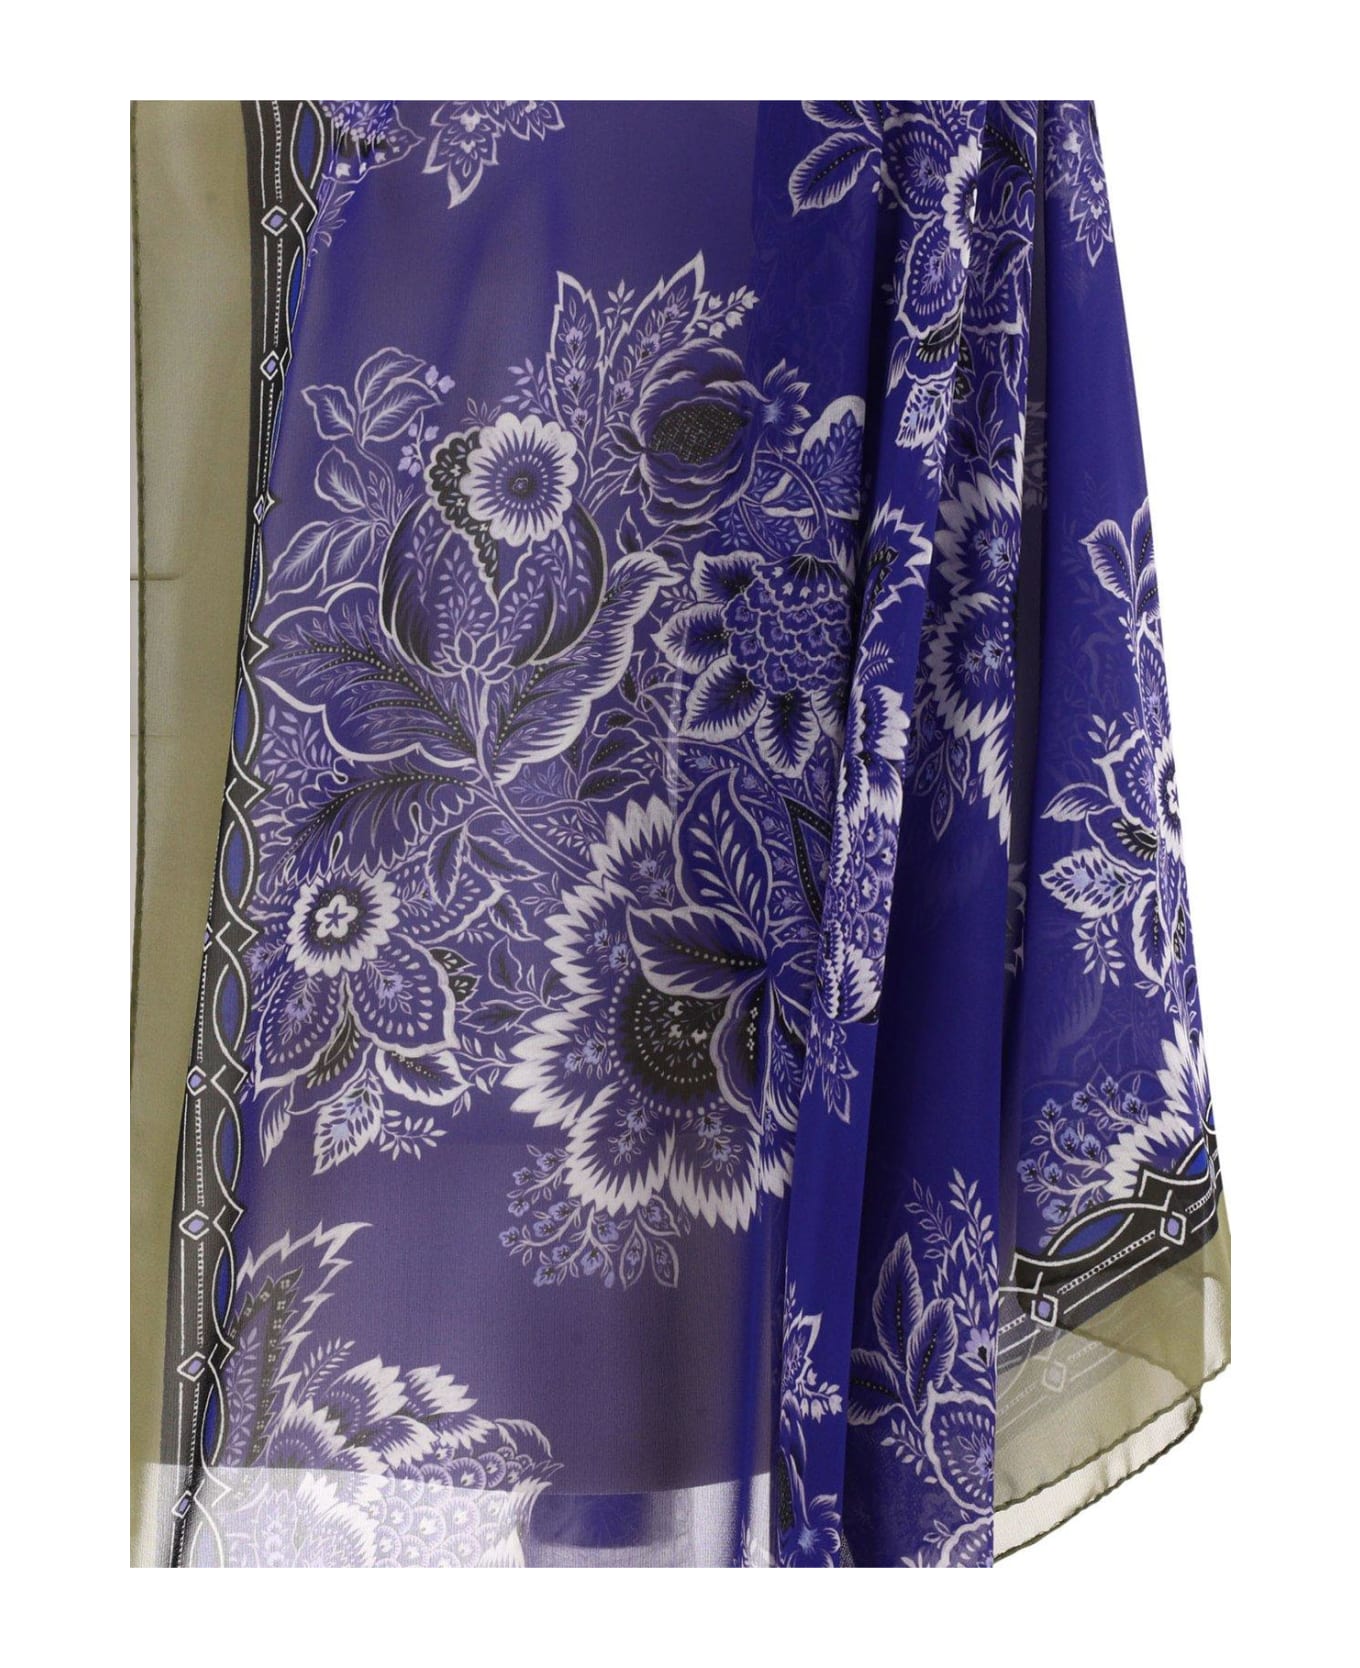 Etro Floral-printed V-neck Tied Blouse - BLUE/WHITE